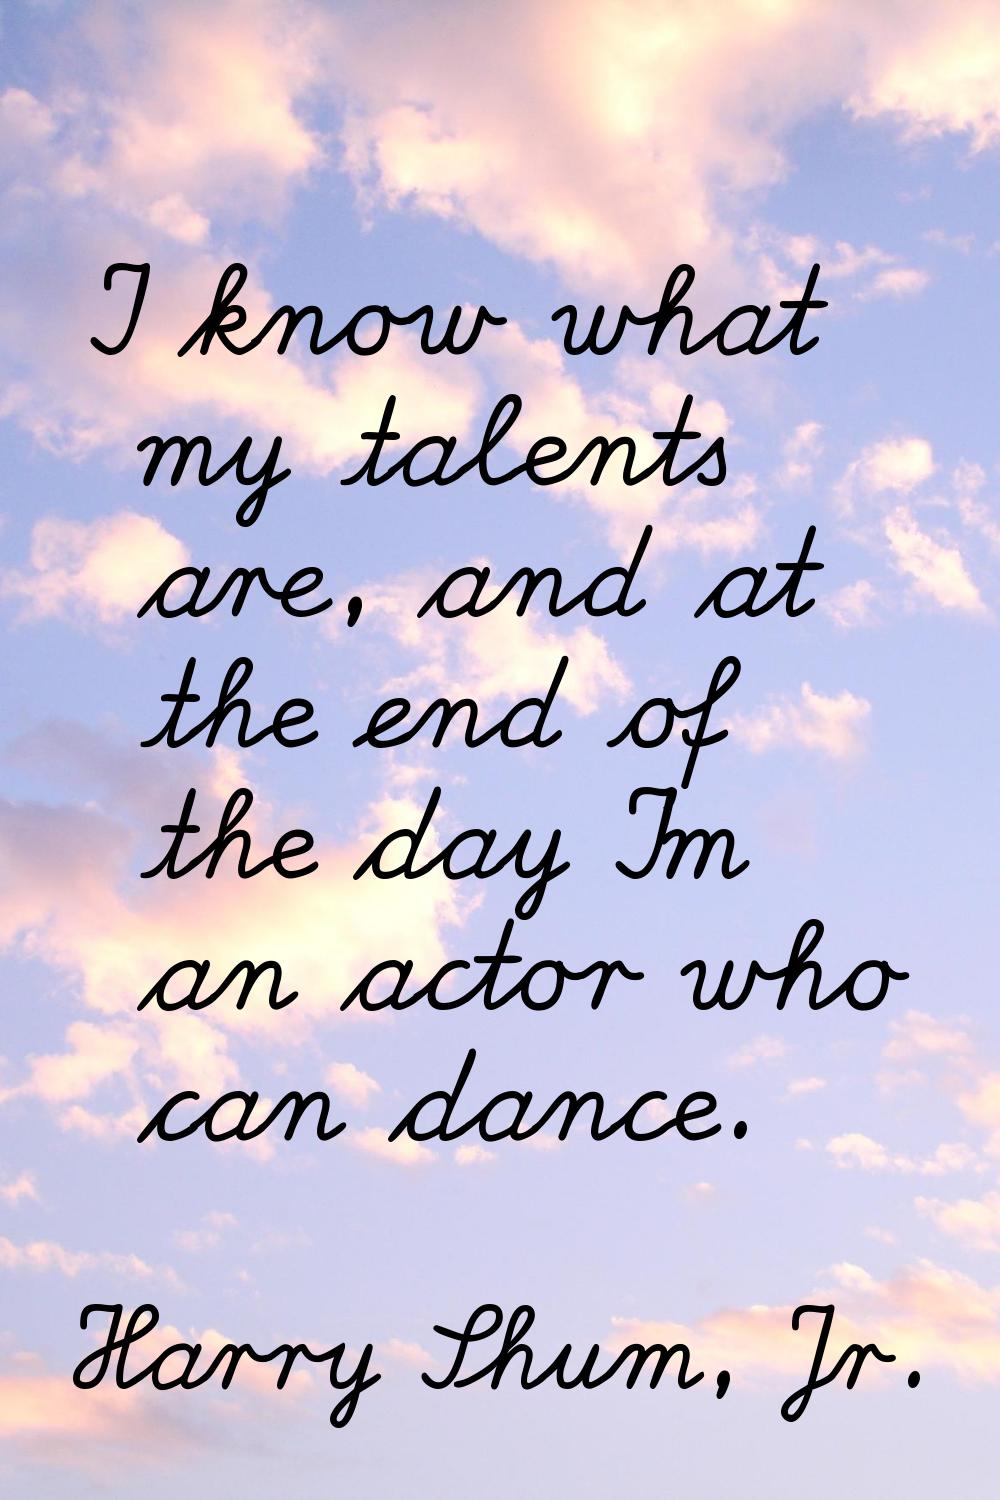 I know what my talents are, and at the end of the day I'm an actor who can dance.